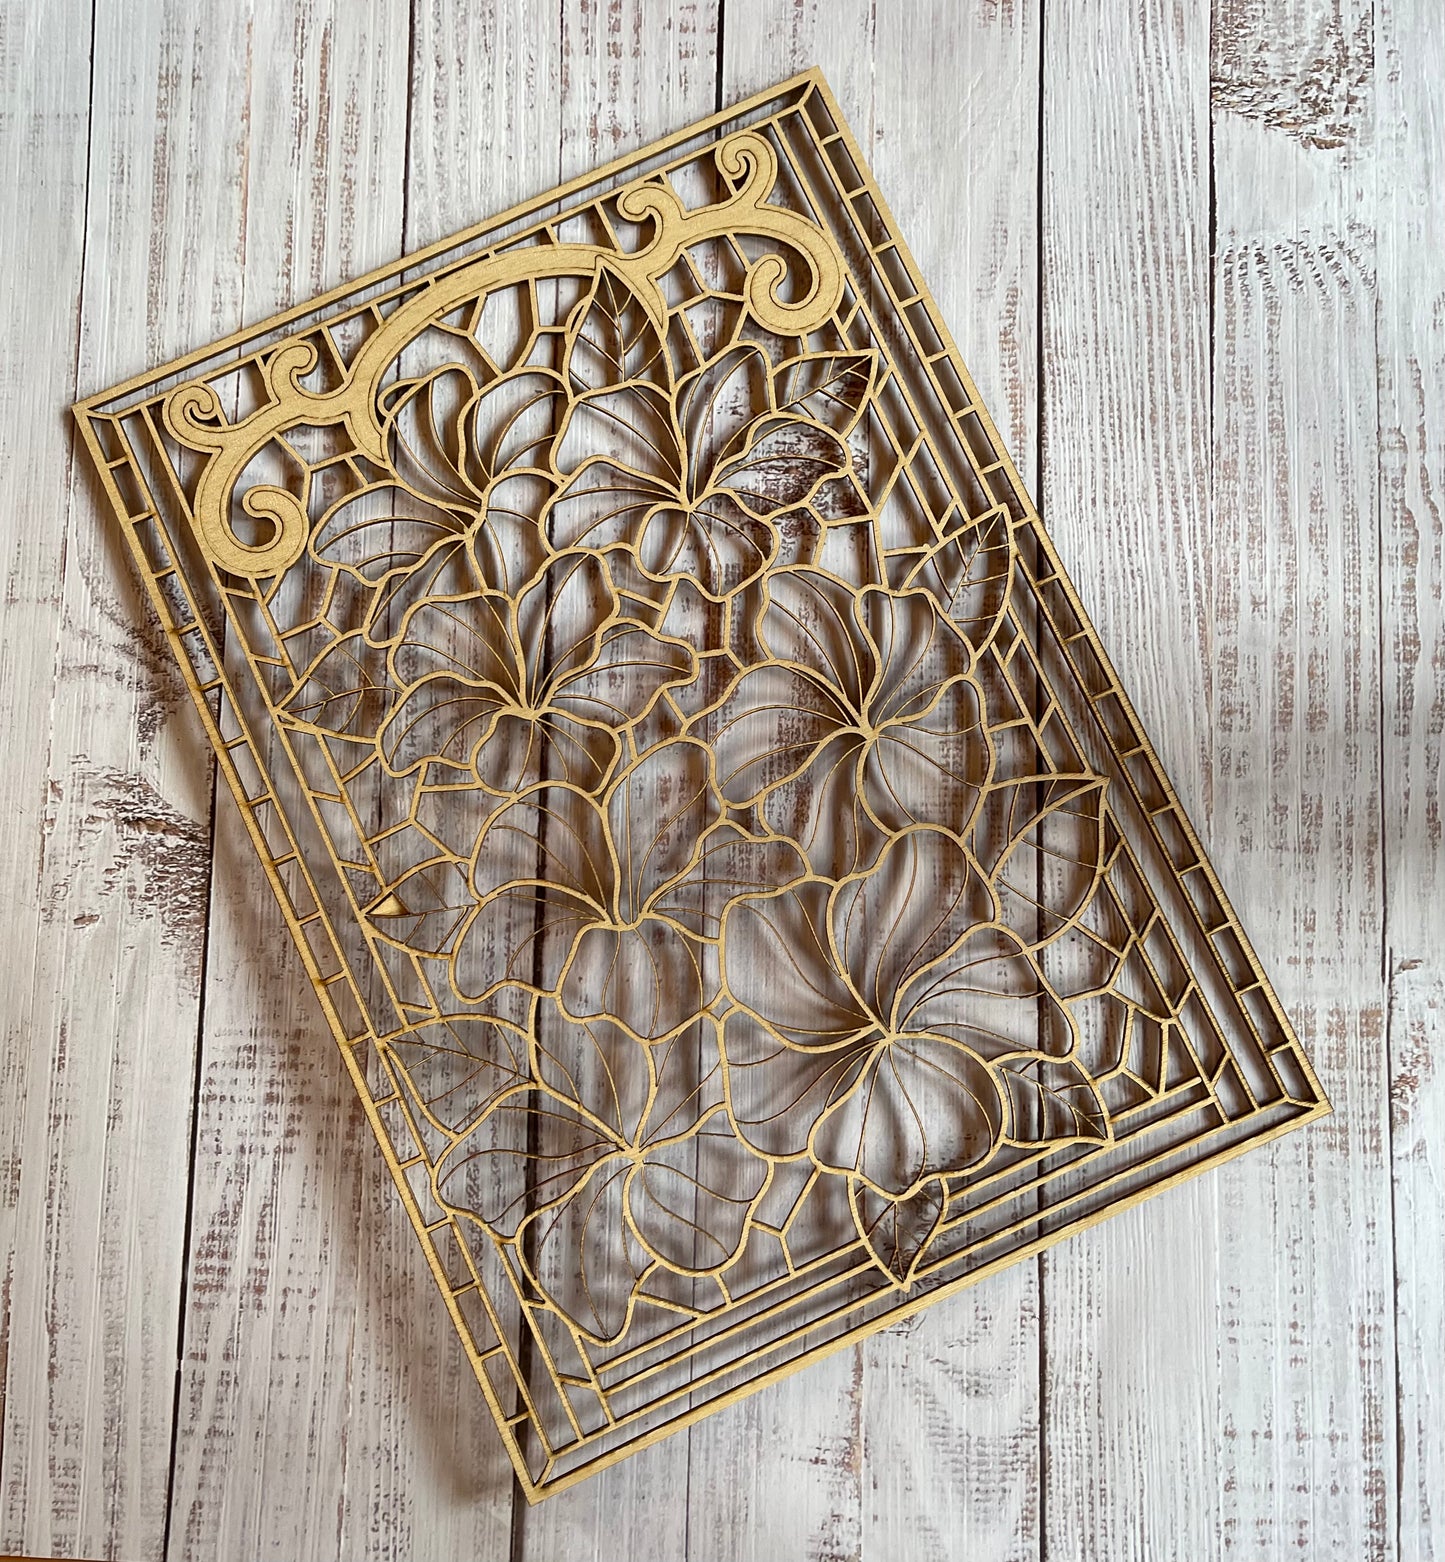 Floral Stained Glass Frame Art Wood Cut Out. Unfinished Wood frame. Resin art frame. DIY wood cutout. Unfinished laser cut wood resin frame.